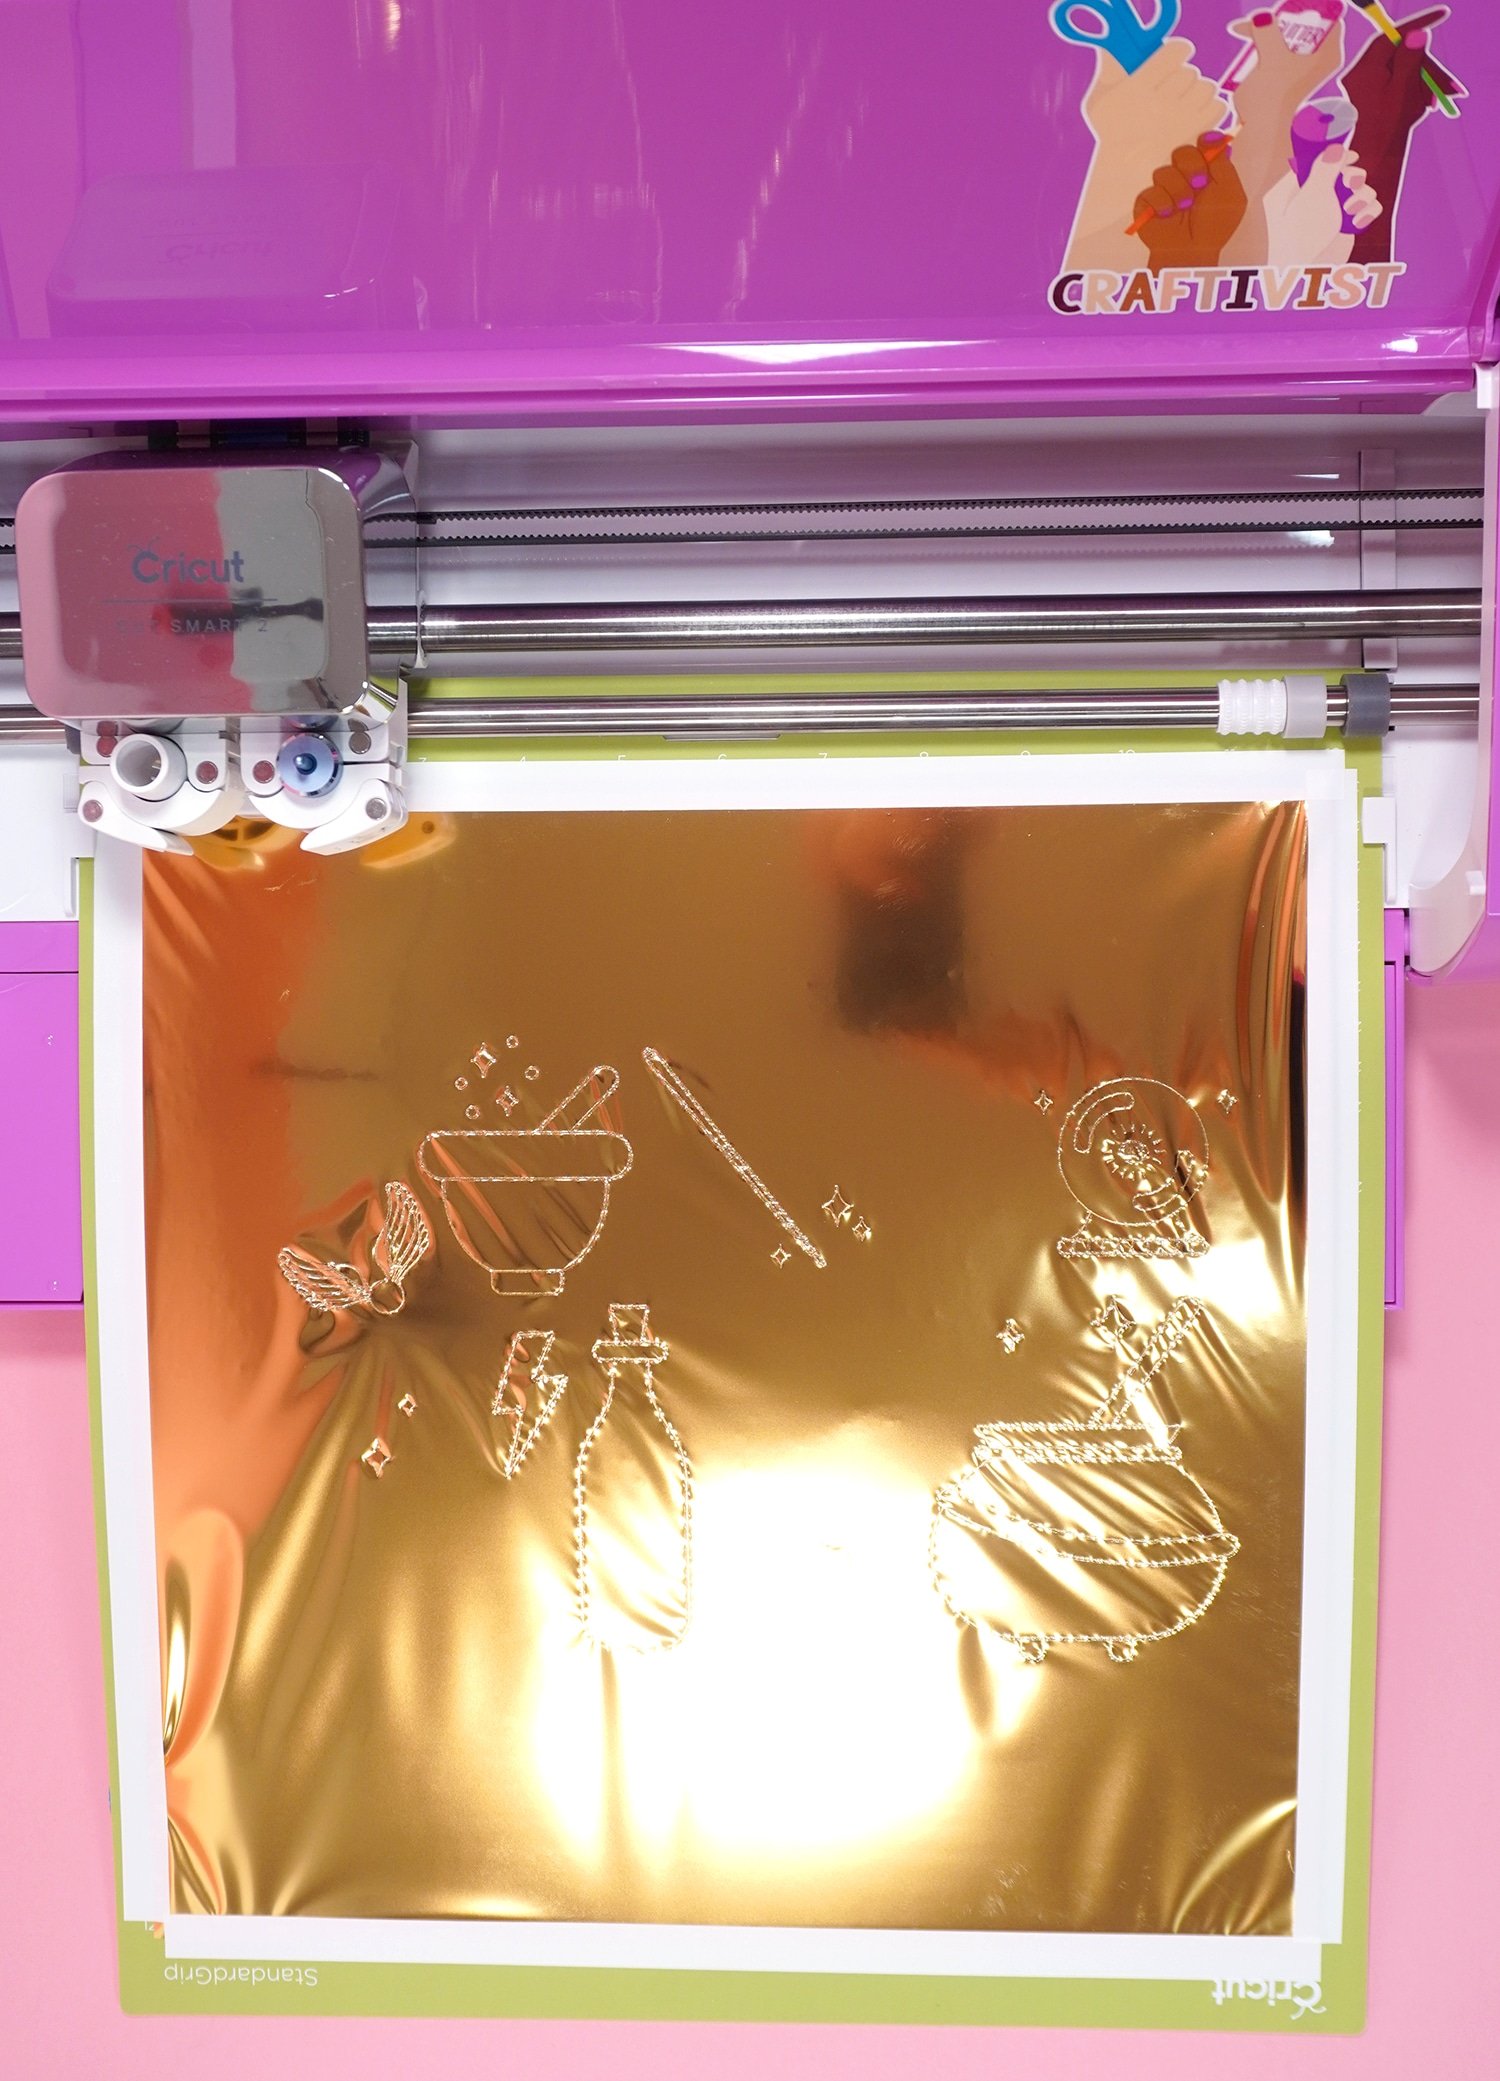 Gold foil with Harry Potter inspired designs on mat in pink Cricut Explore Air 2 machine